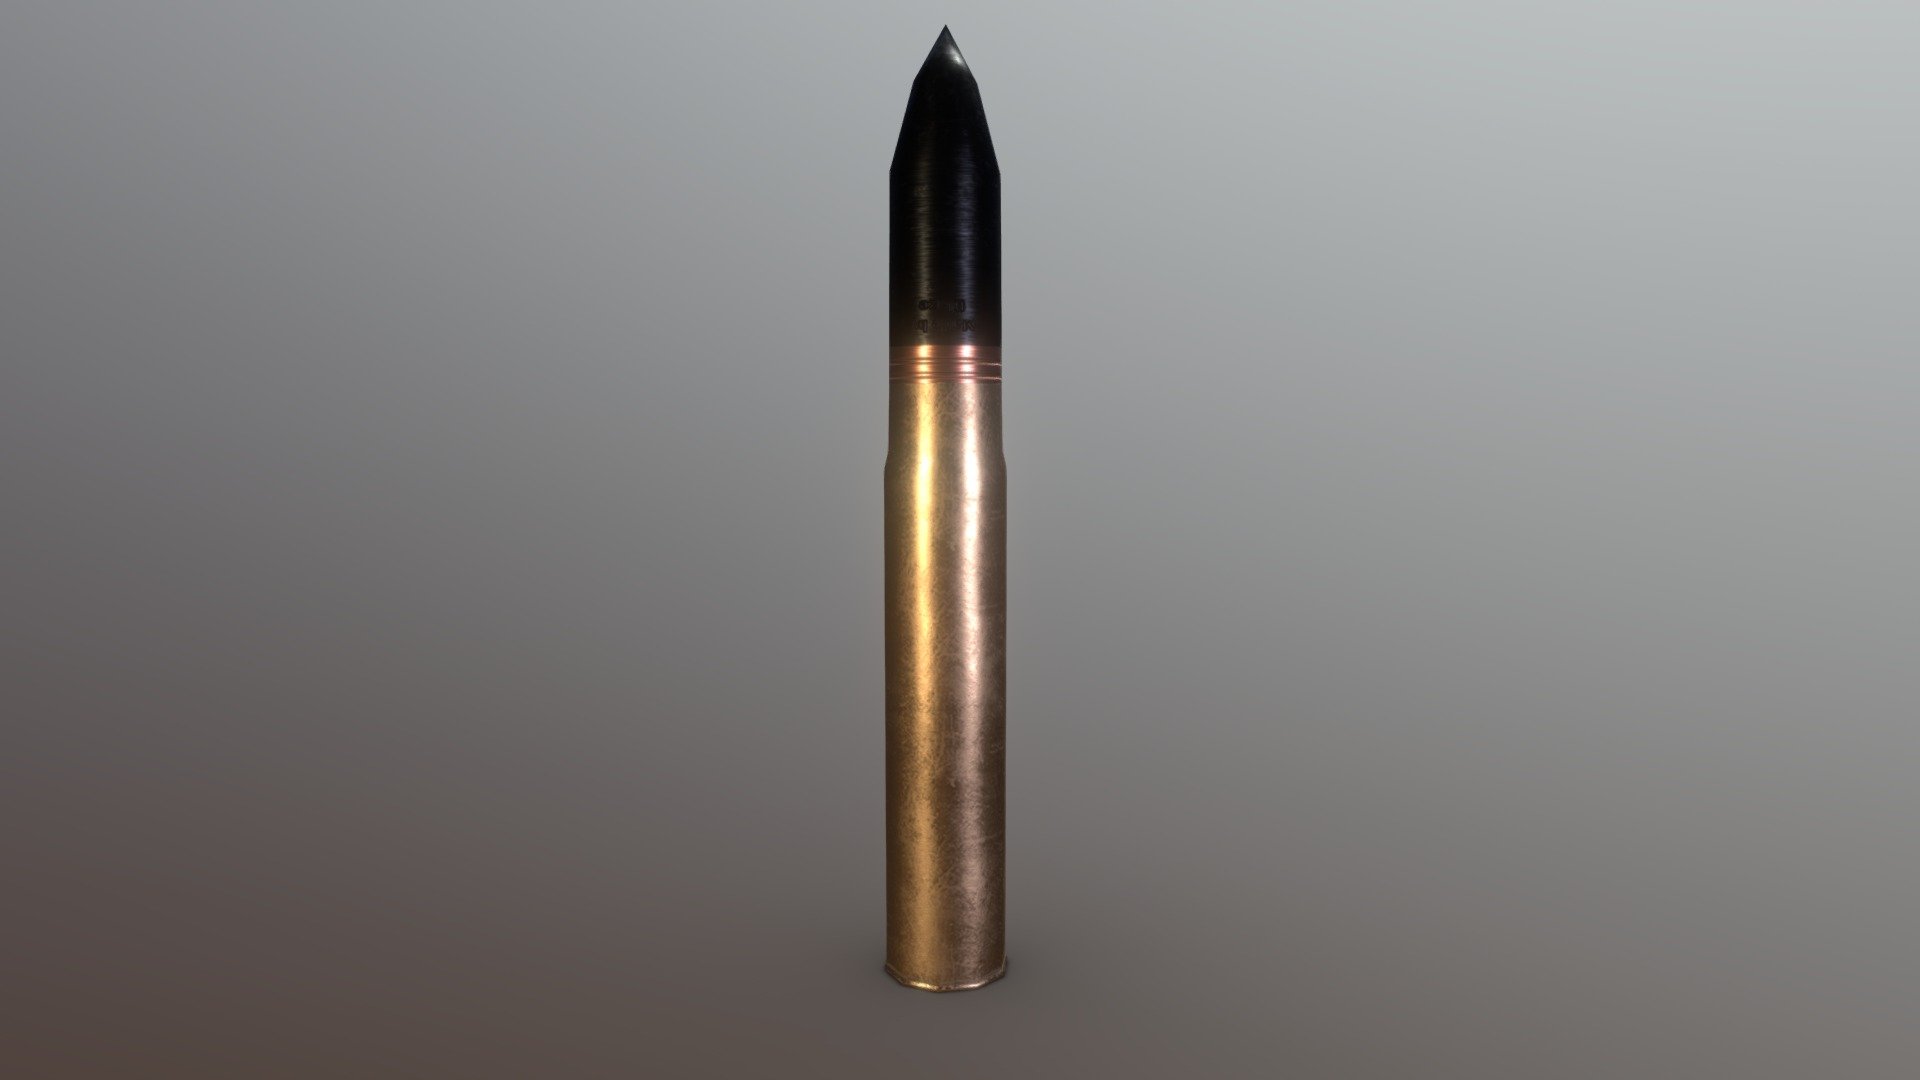 force of a tank shell